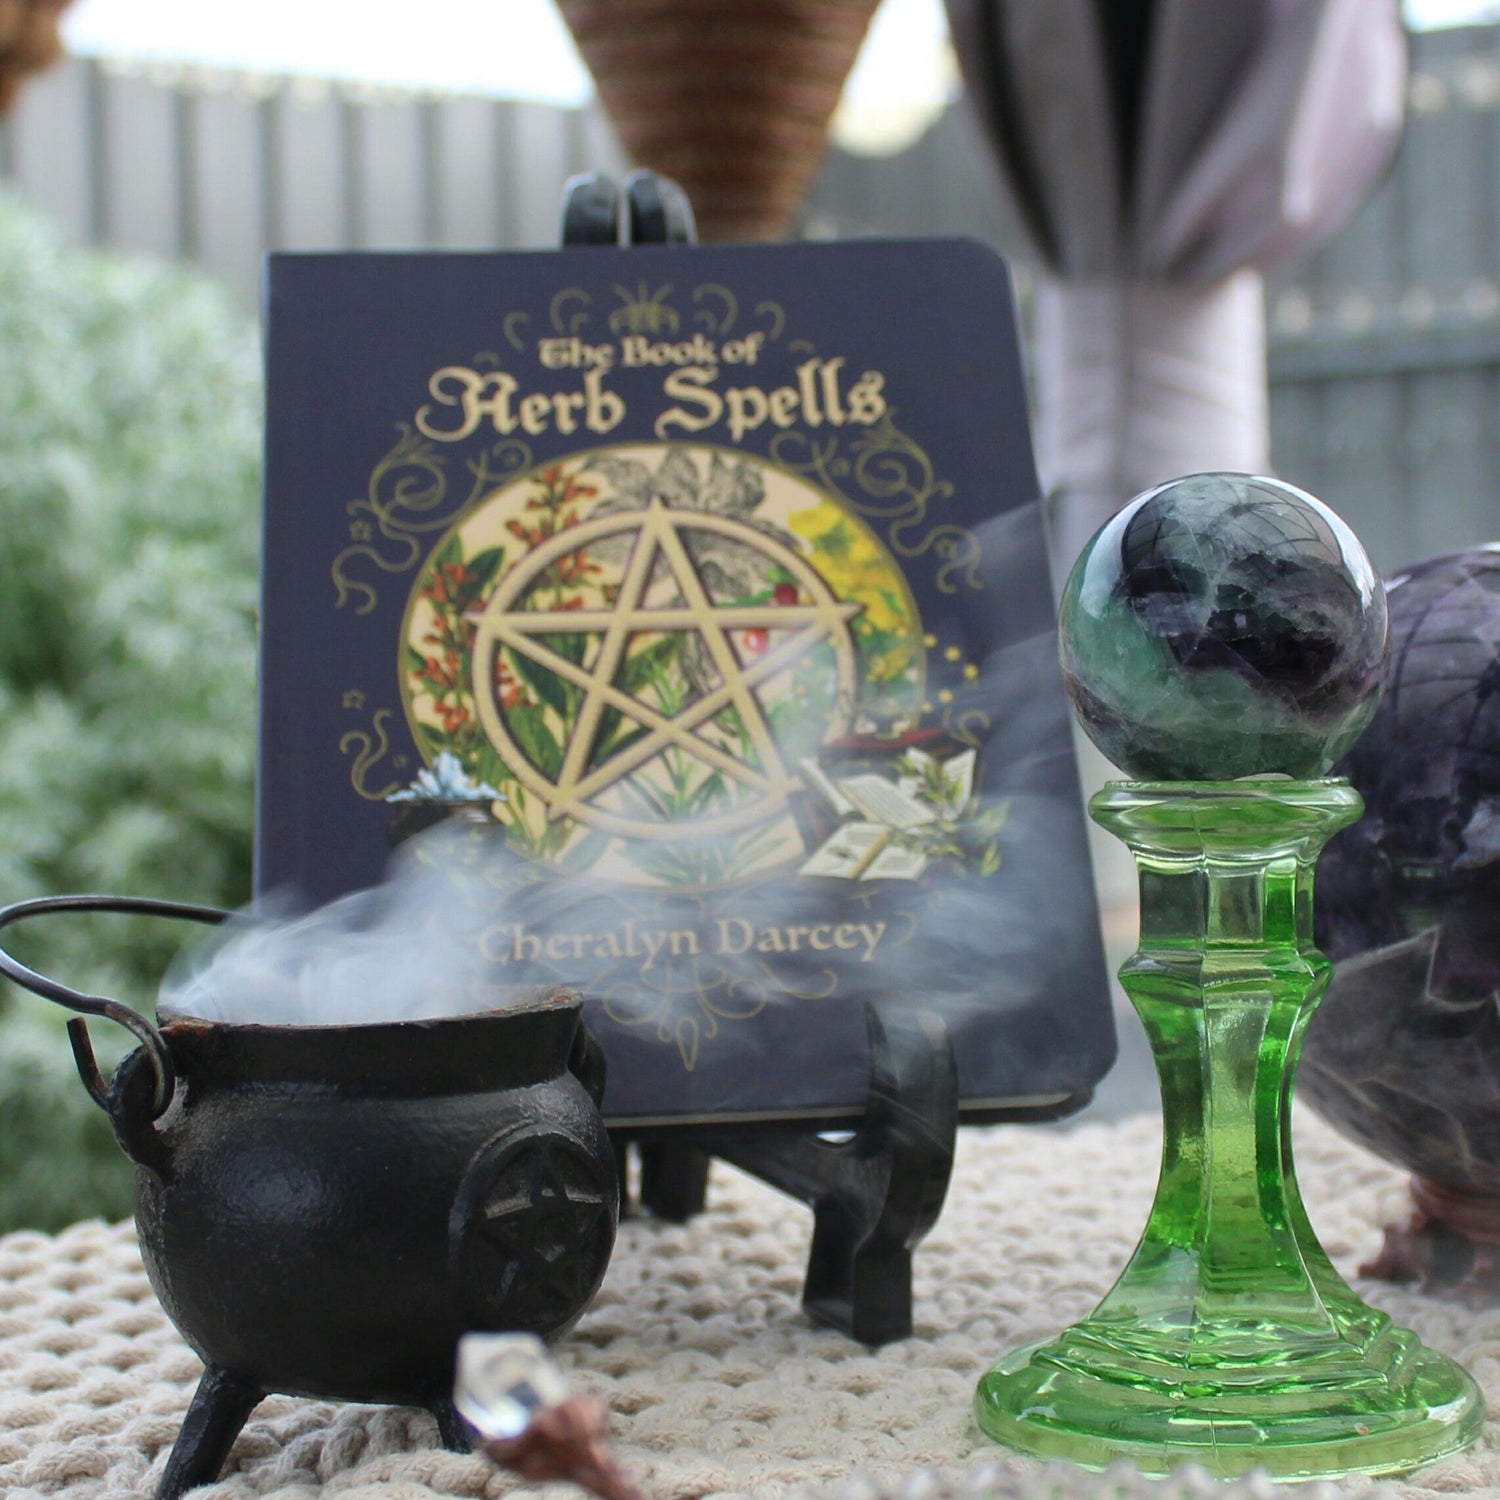 The Book of Herb Spells, Cheralyn Darcey - JOURNEY artisan soaps & candles